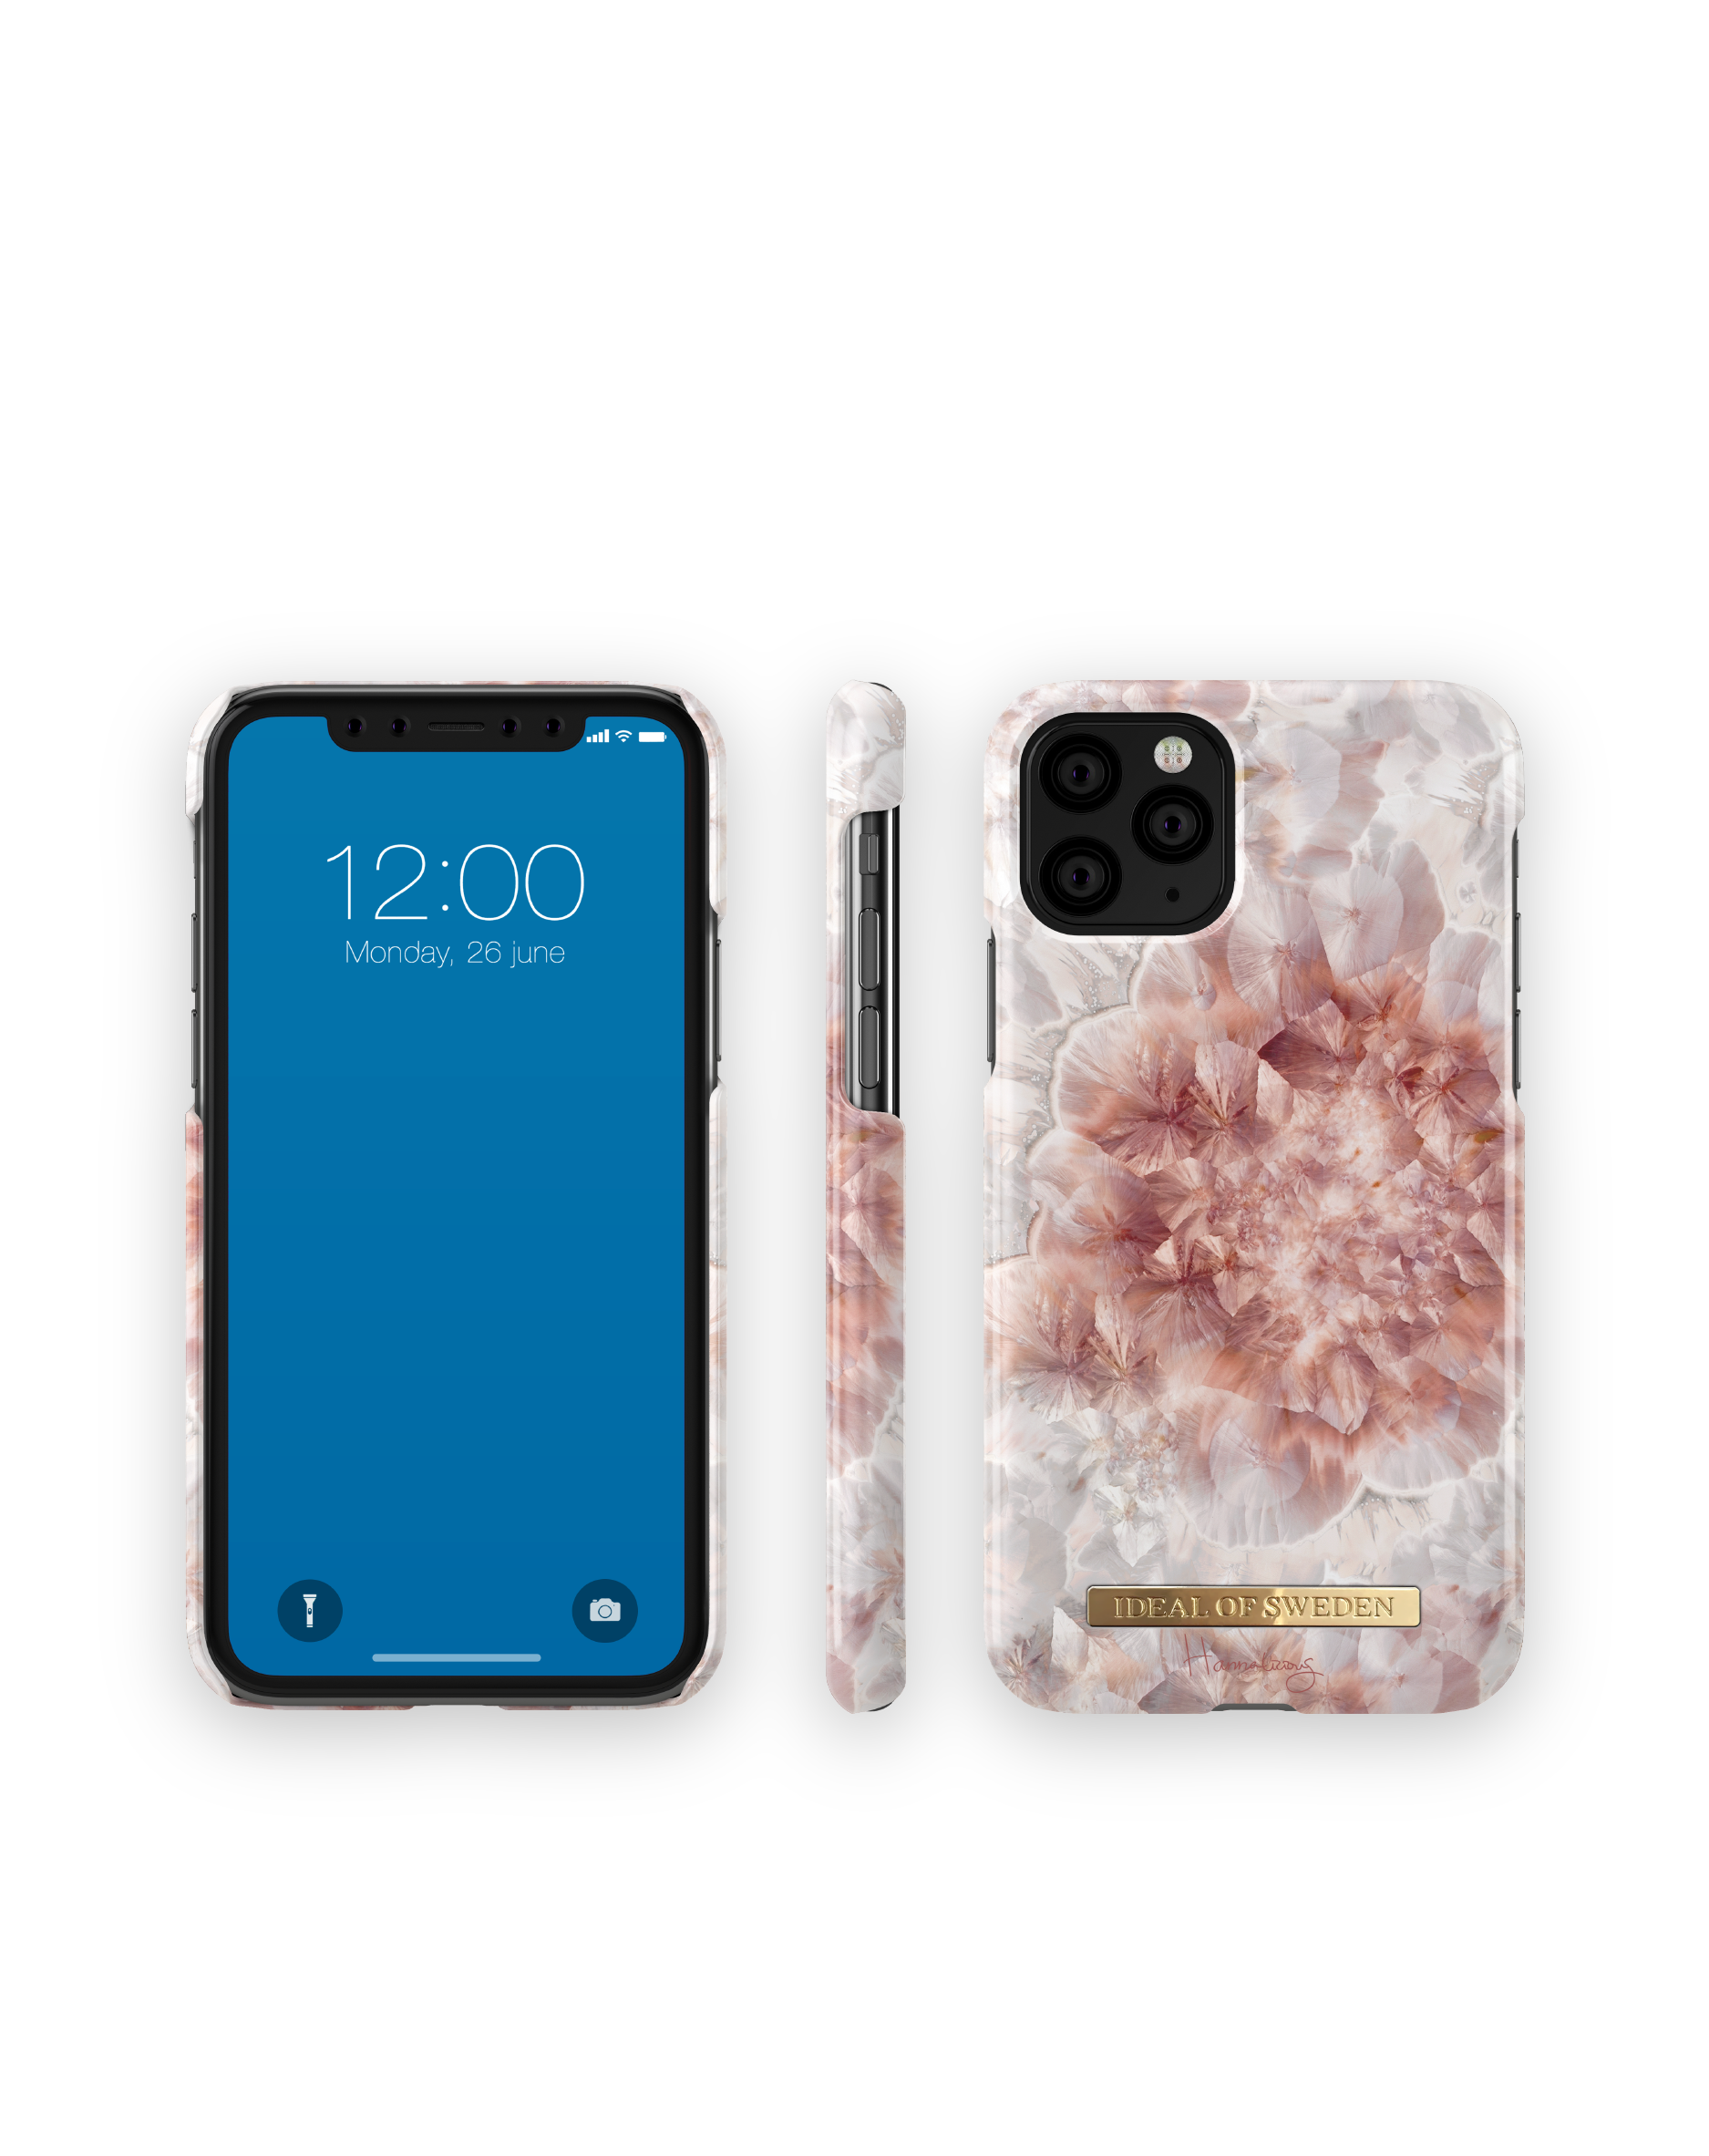 IDEAL OF Apple Apple Backcover, iPhone 11 Crystal iPhone Roze Apple Quartz IDFCH2-I1958-126, XS, SWEDEN iPhone X, Apple, Pro